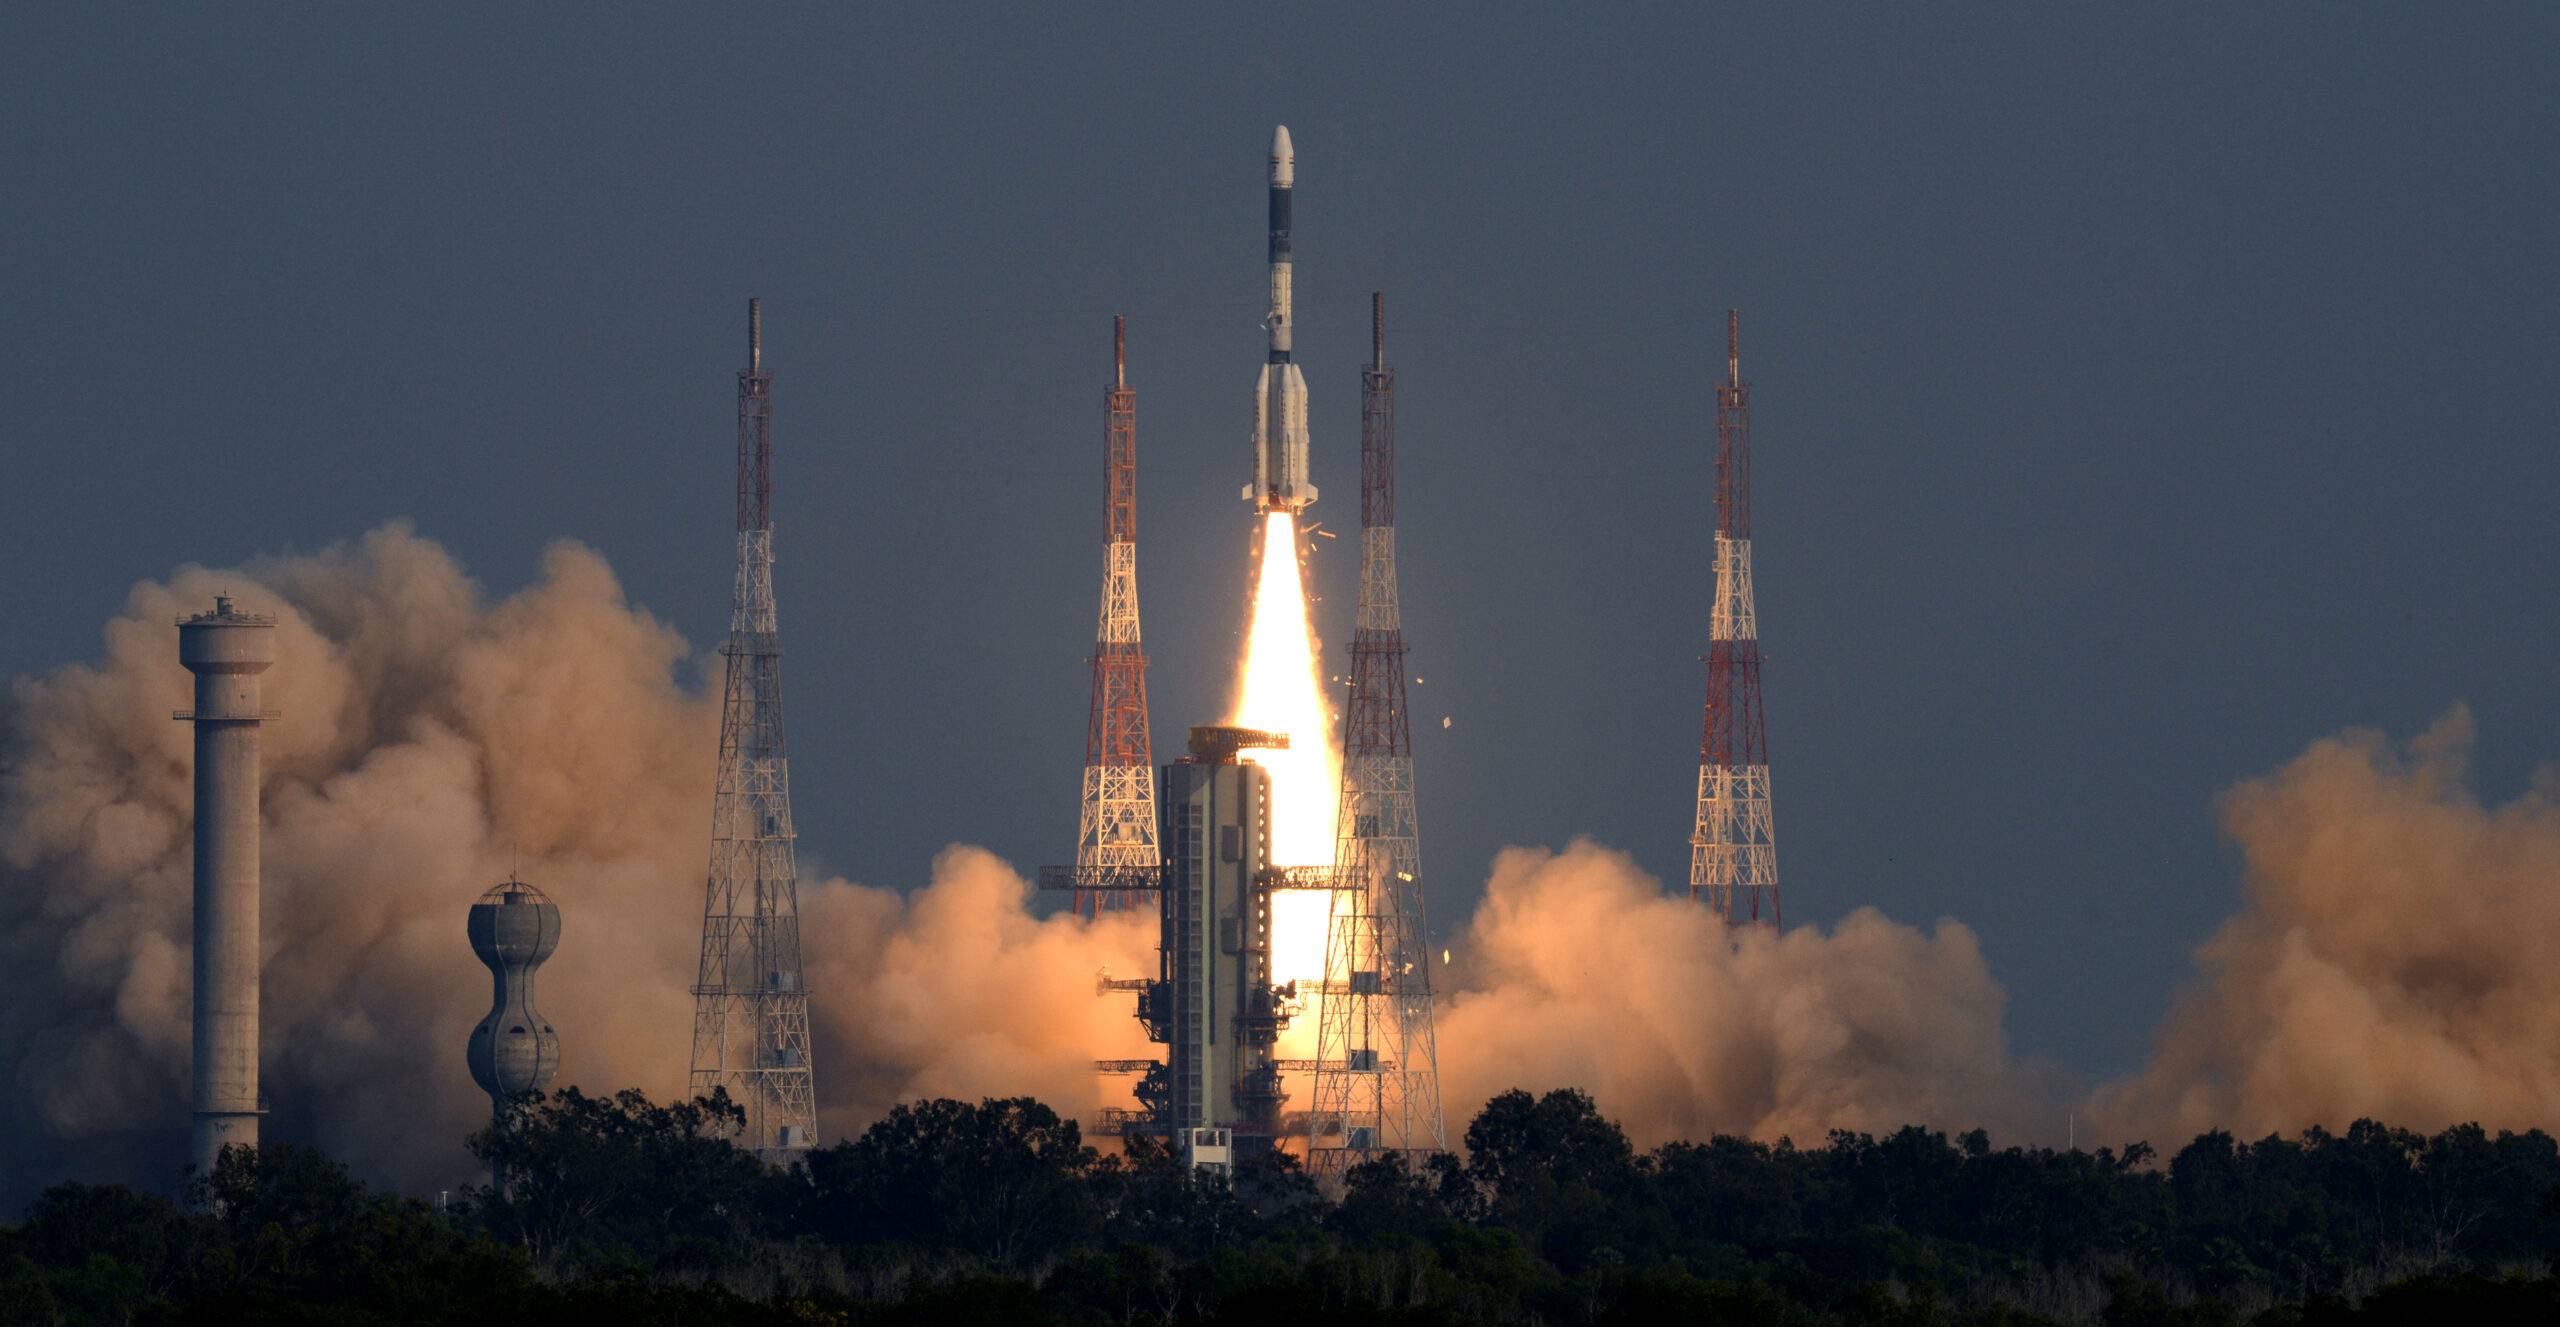 The GSLV in action. The GSLV F11 successfully launched GSAT 7A ISRO’s 39th communication satellite on December 19 2018 scaled